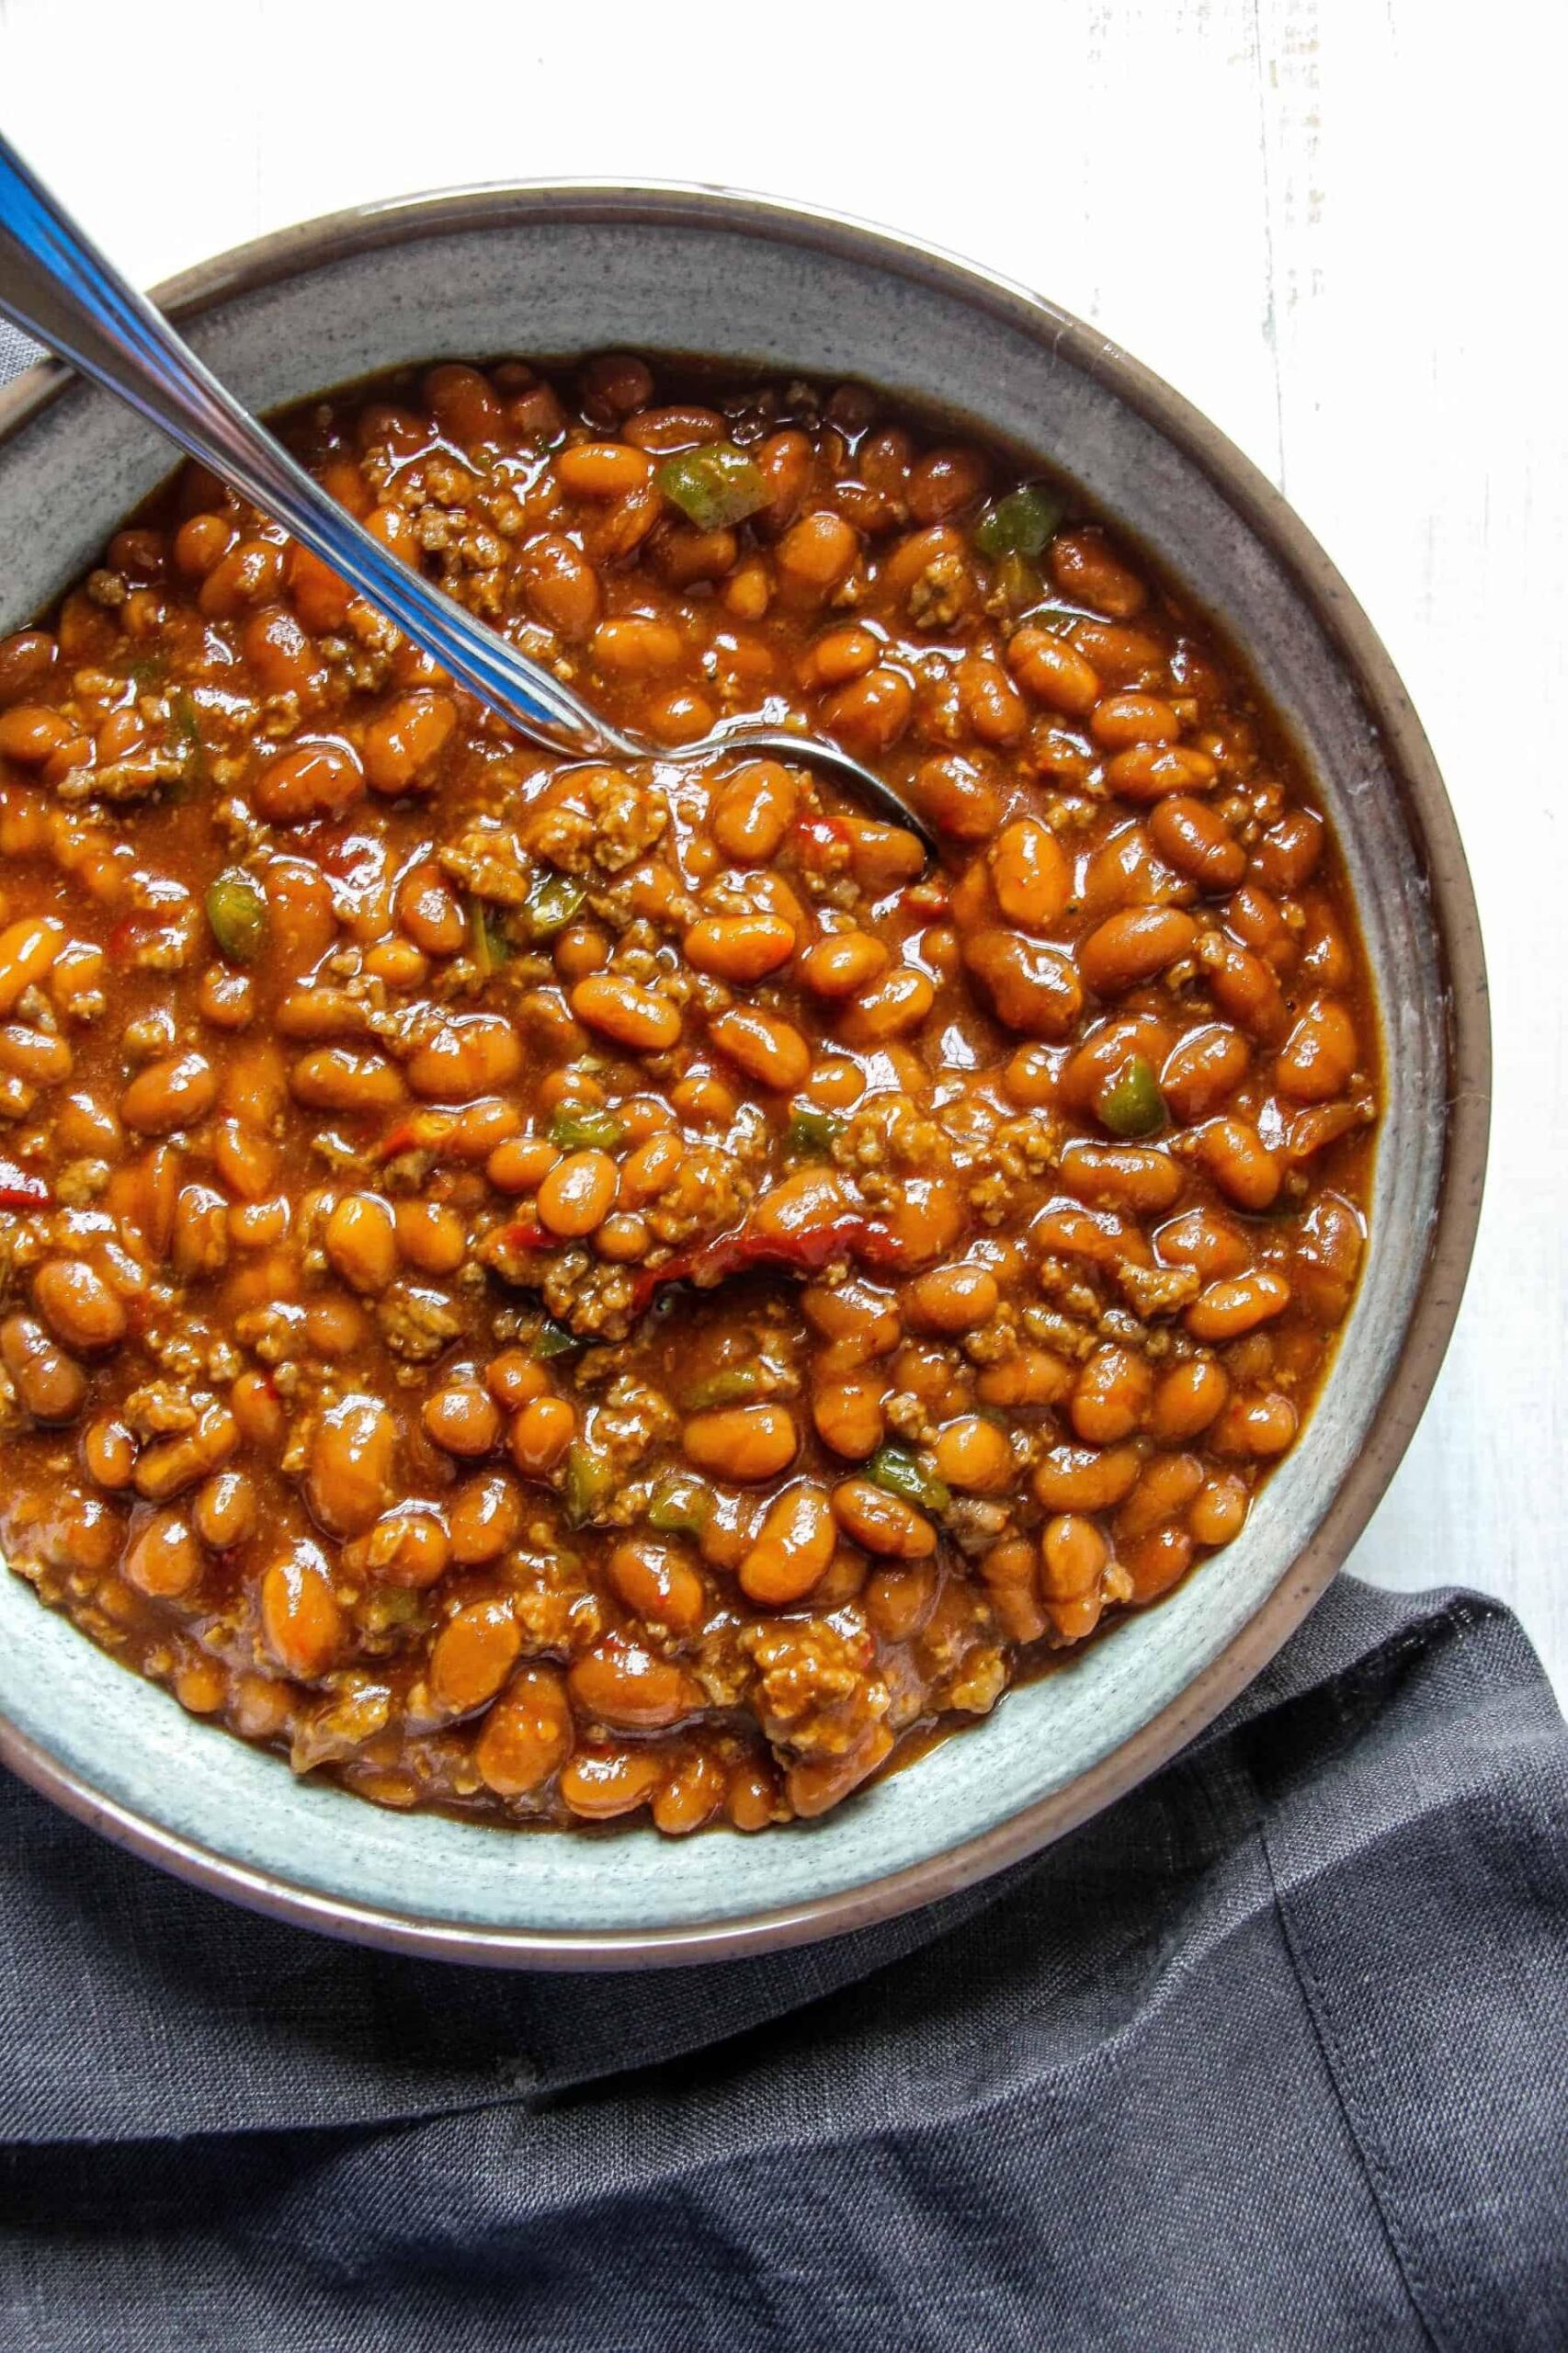  These beans are worth begging for seconds.